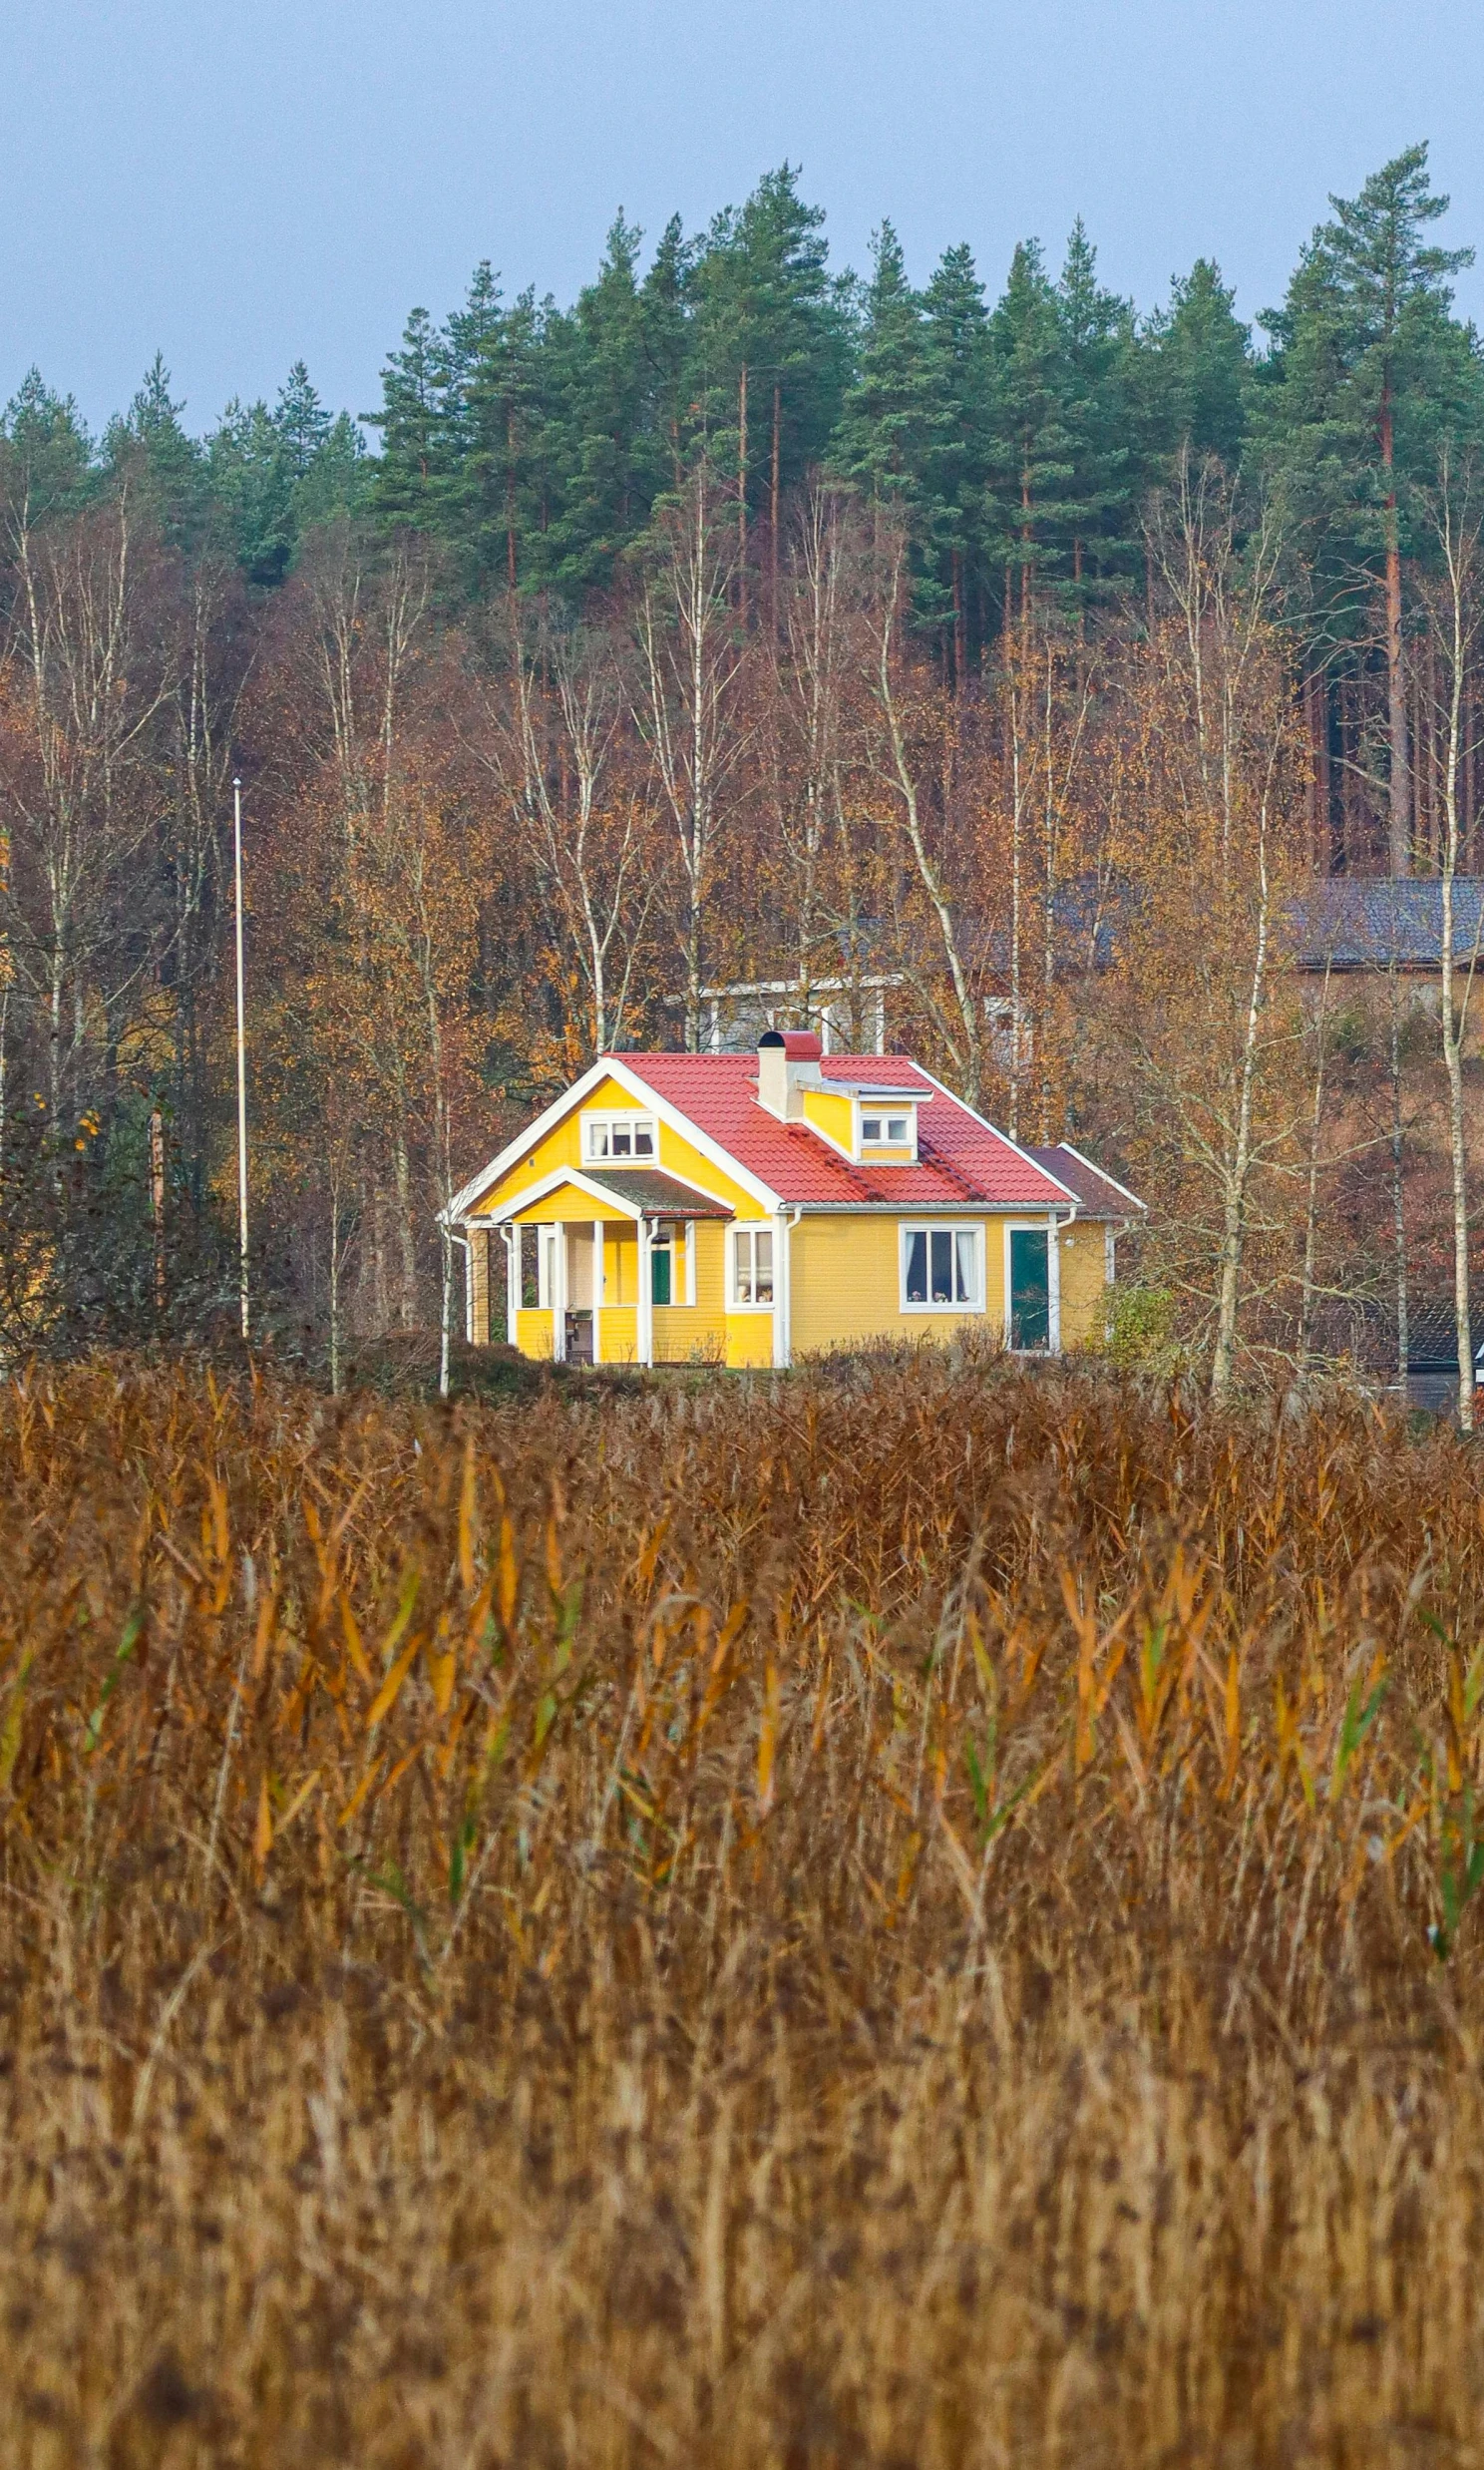 an image of a small yellow house in the woods